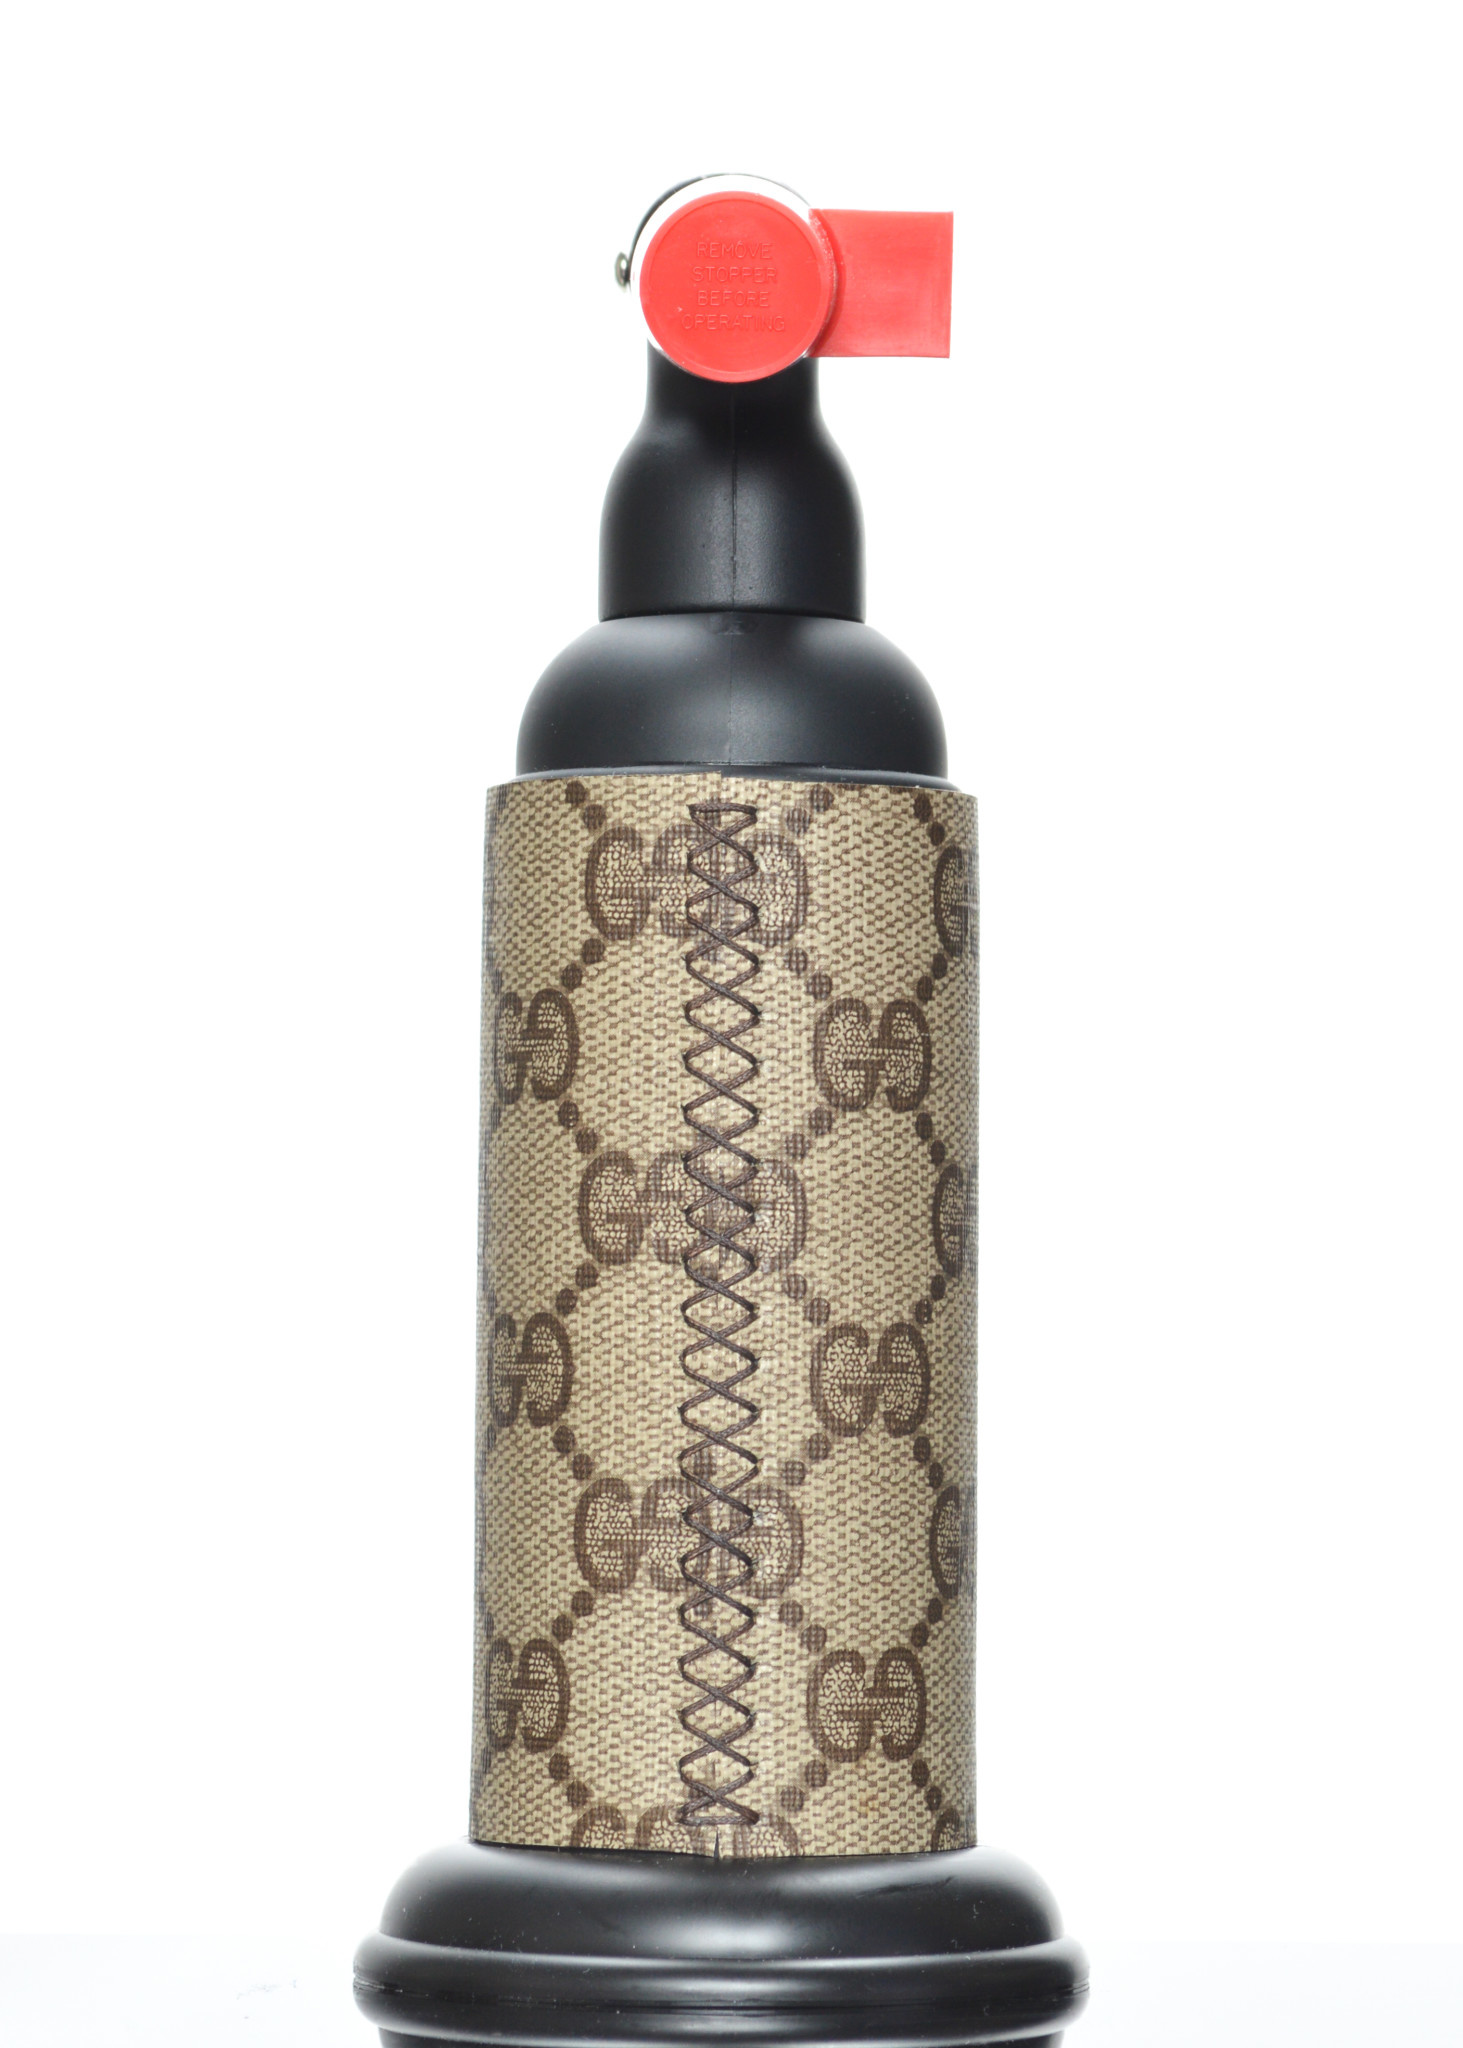 Gucci, Other, Gucci Water Bottle